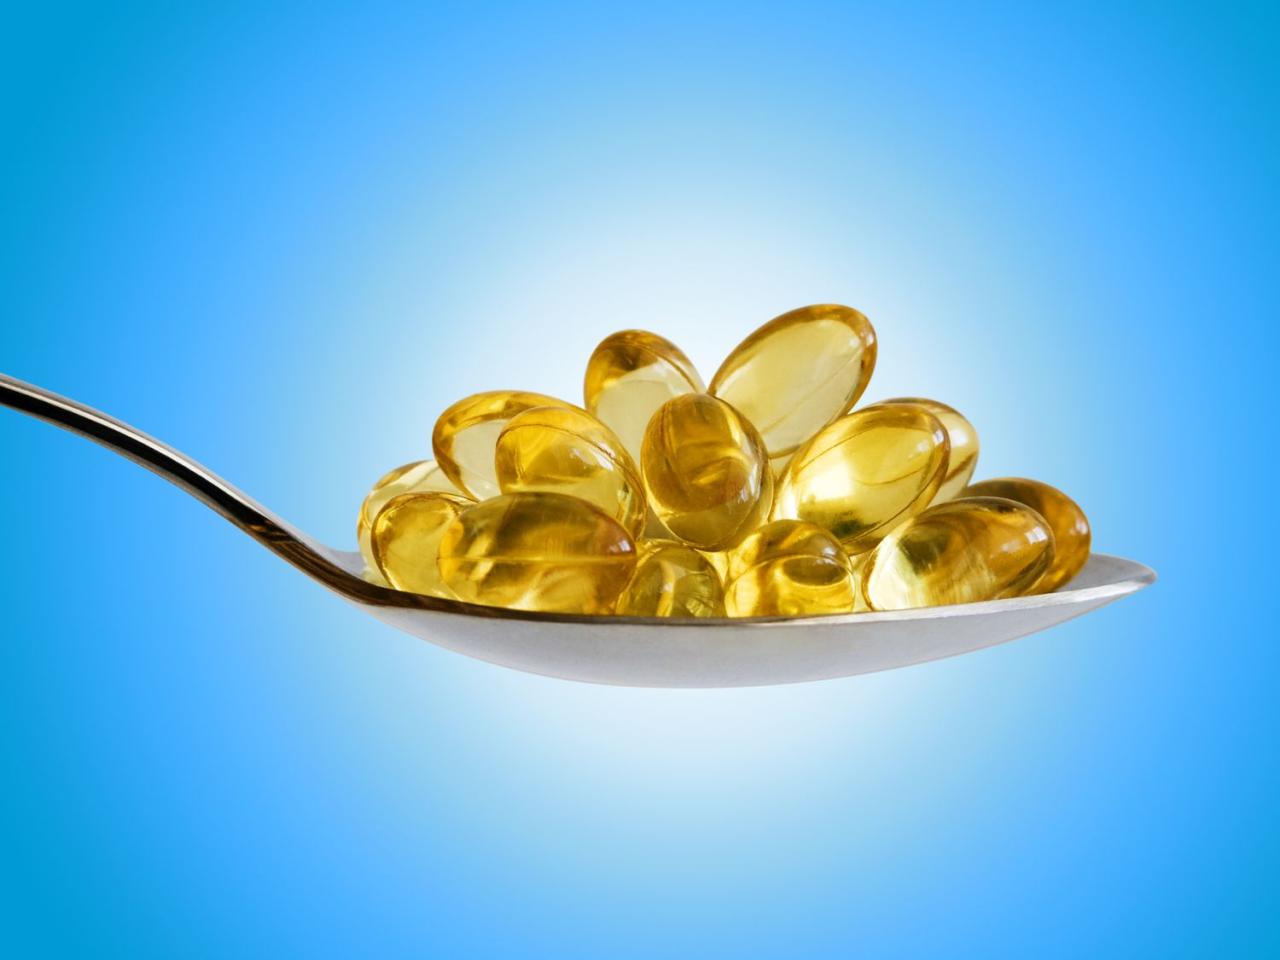 Fish Oil For Arthritis And Joint Pain: Can It Help?